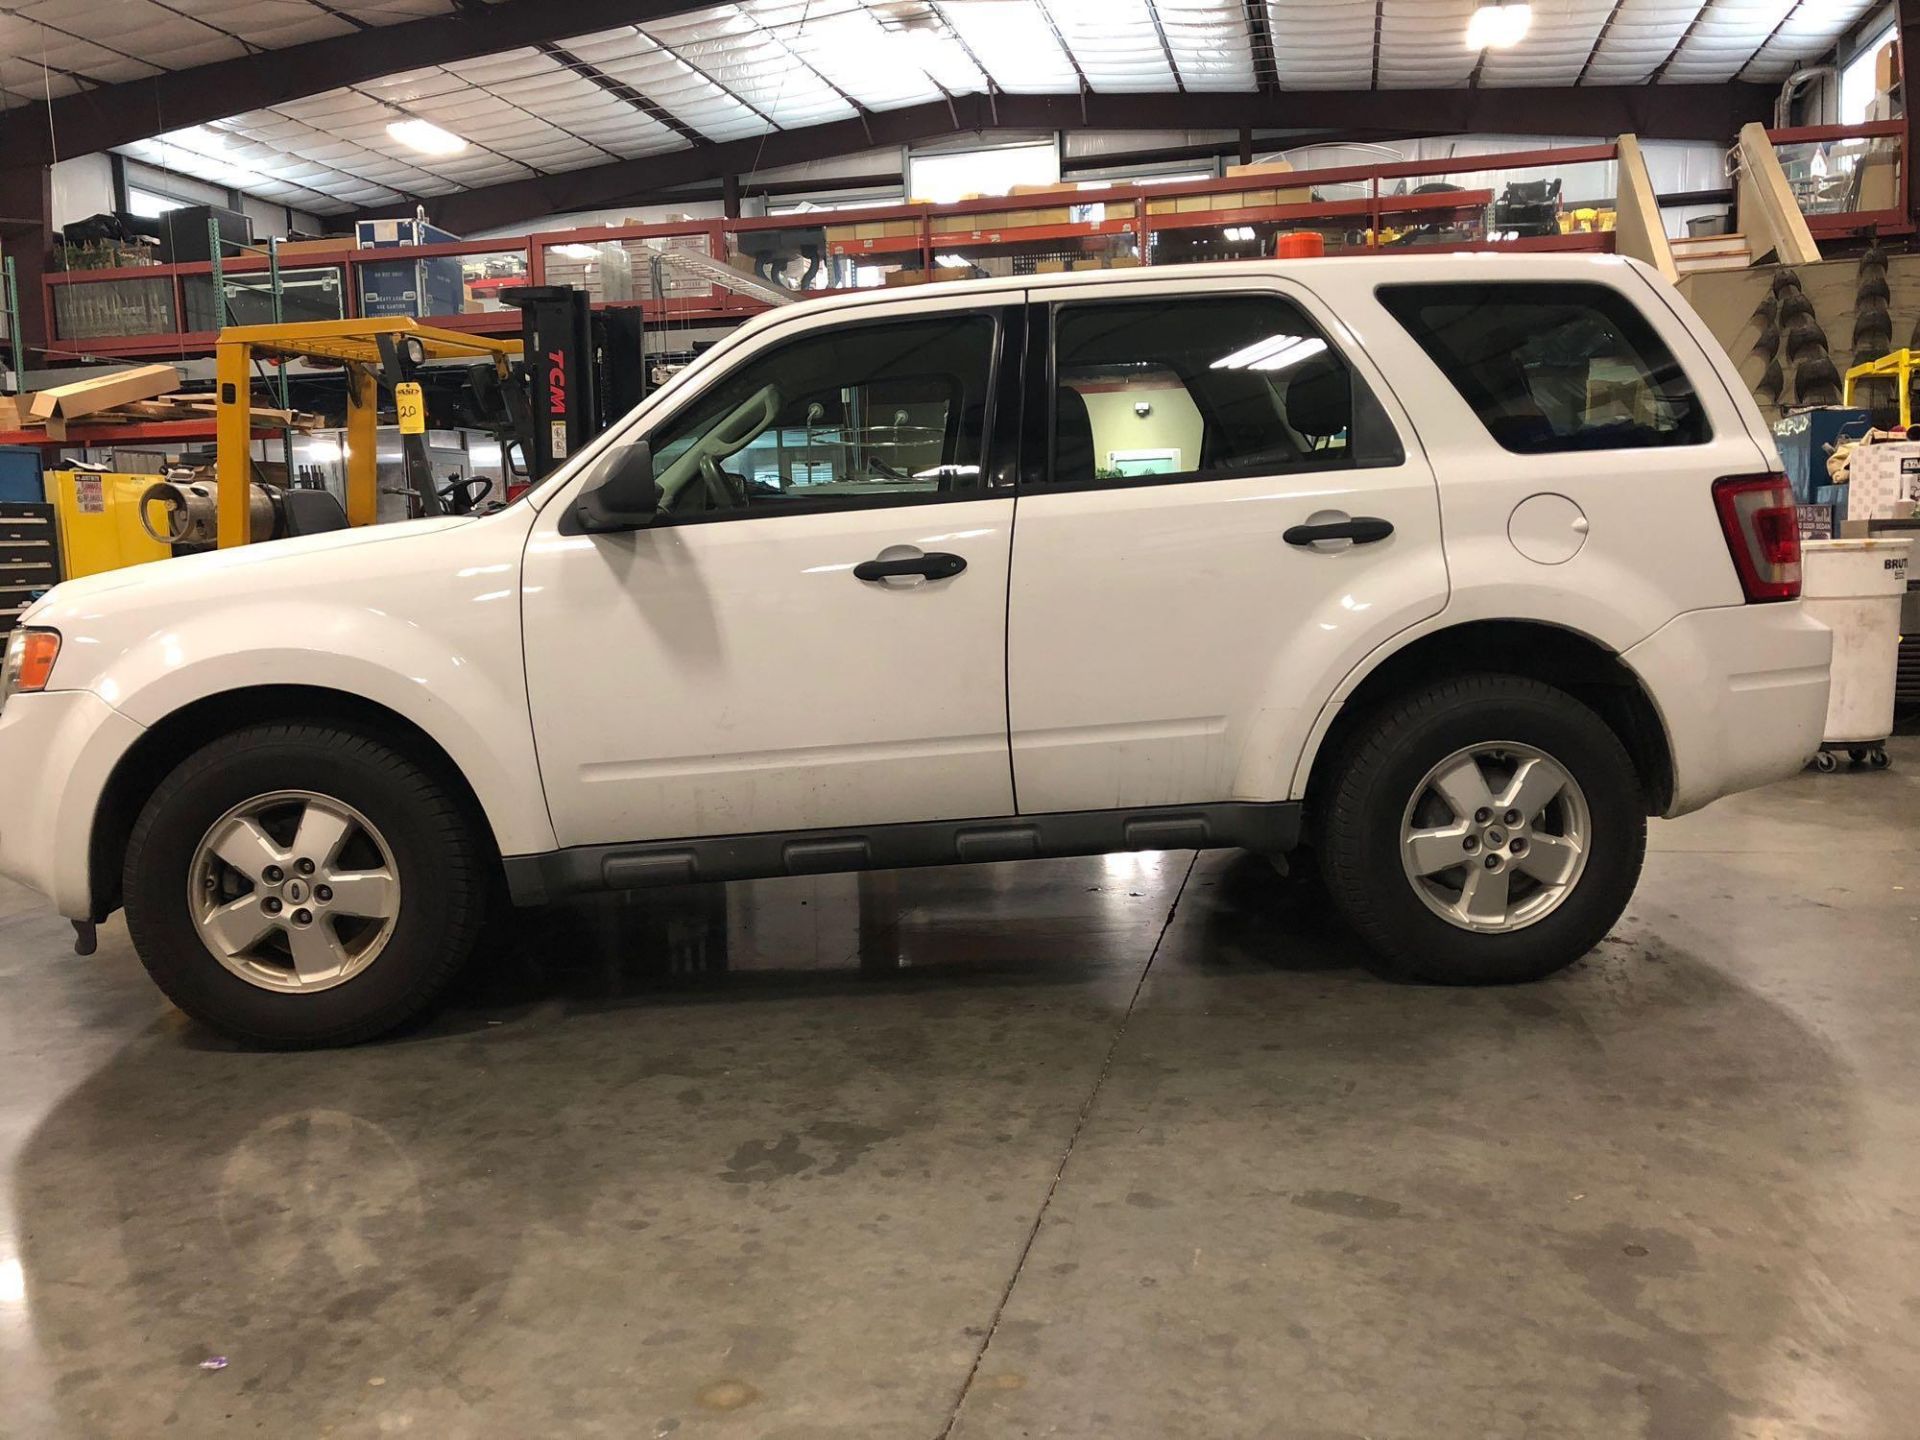 2010 FORD ESCAPE SUV, 4 DOOR, AUTOMATIC TRANSMISSION, RUNS - Image 2 of 17